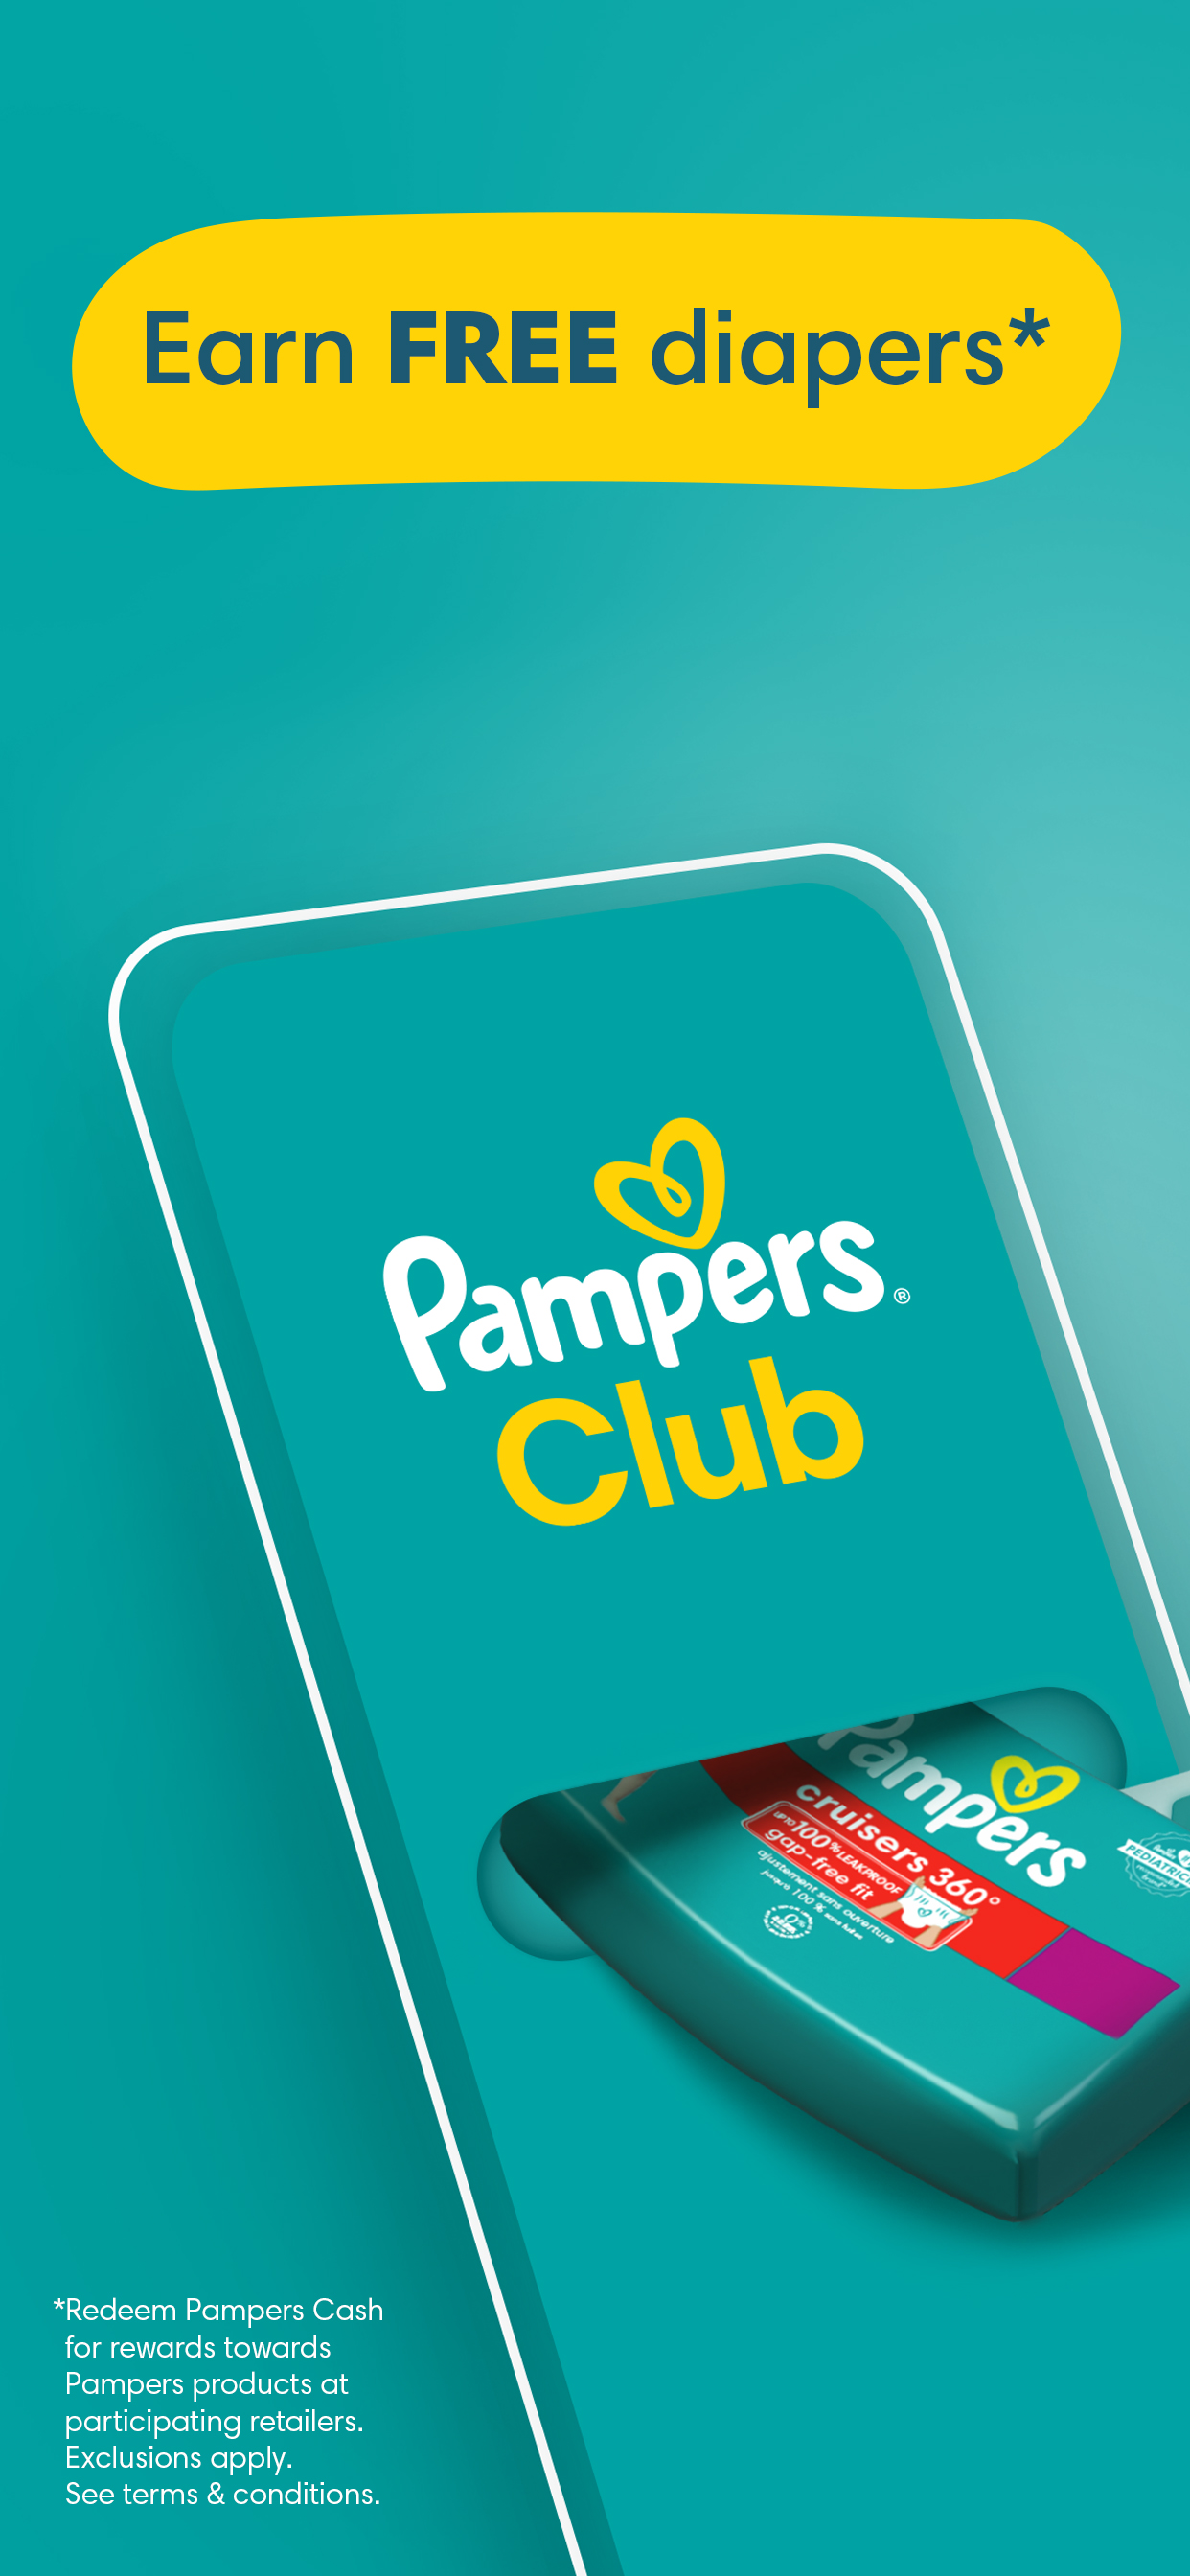 pieluchy pampers premium care 1 mall